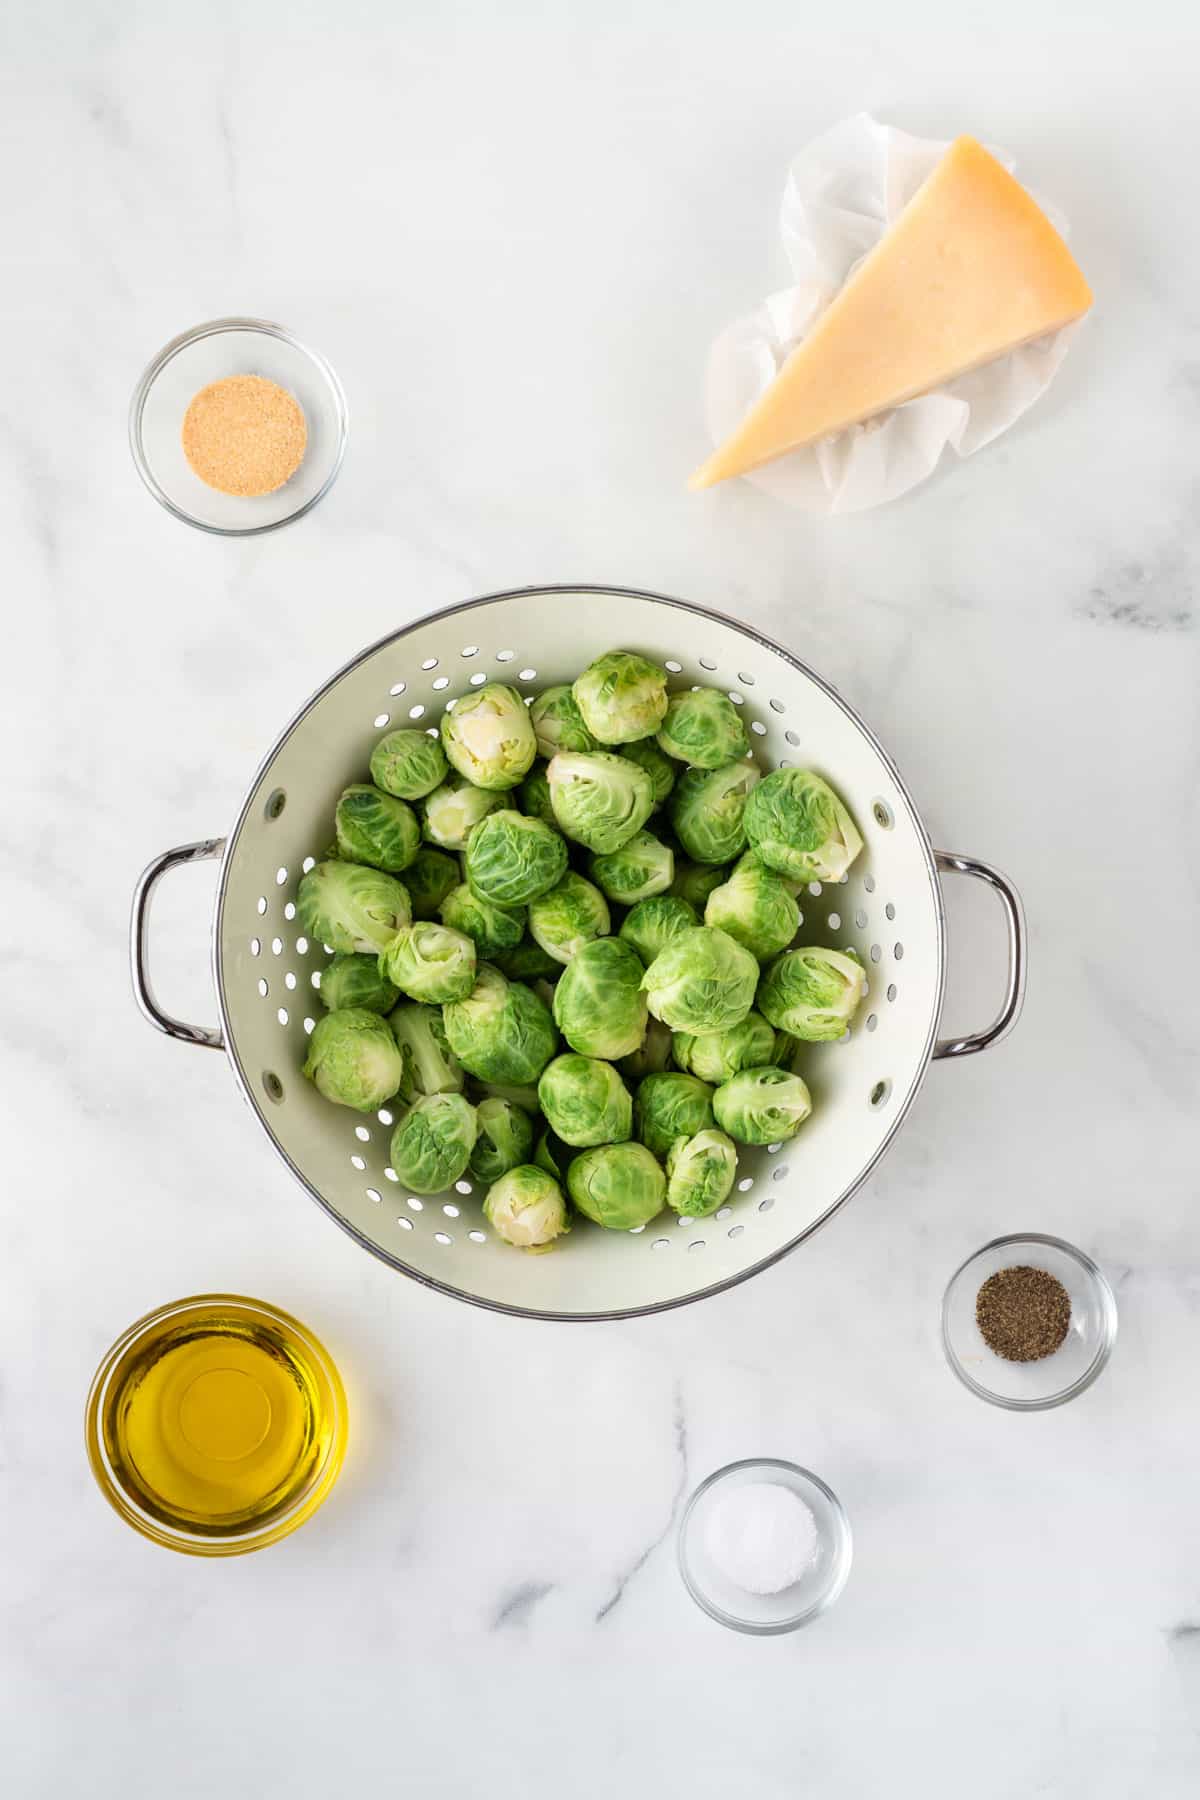 ingredients needed to make air fryer brussels sprouts